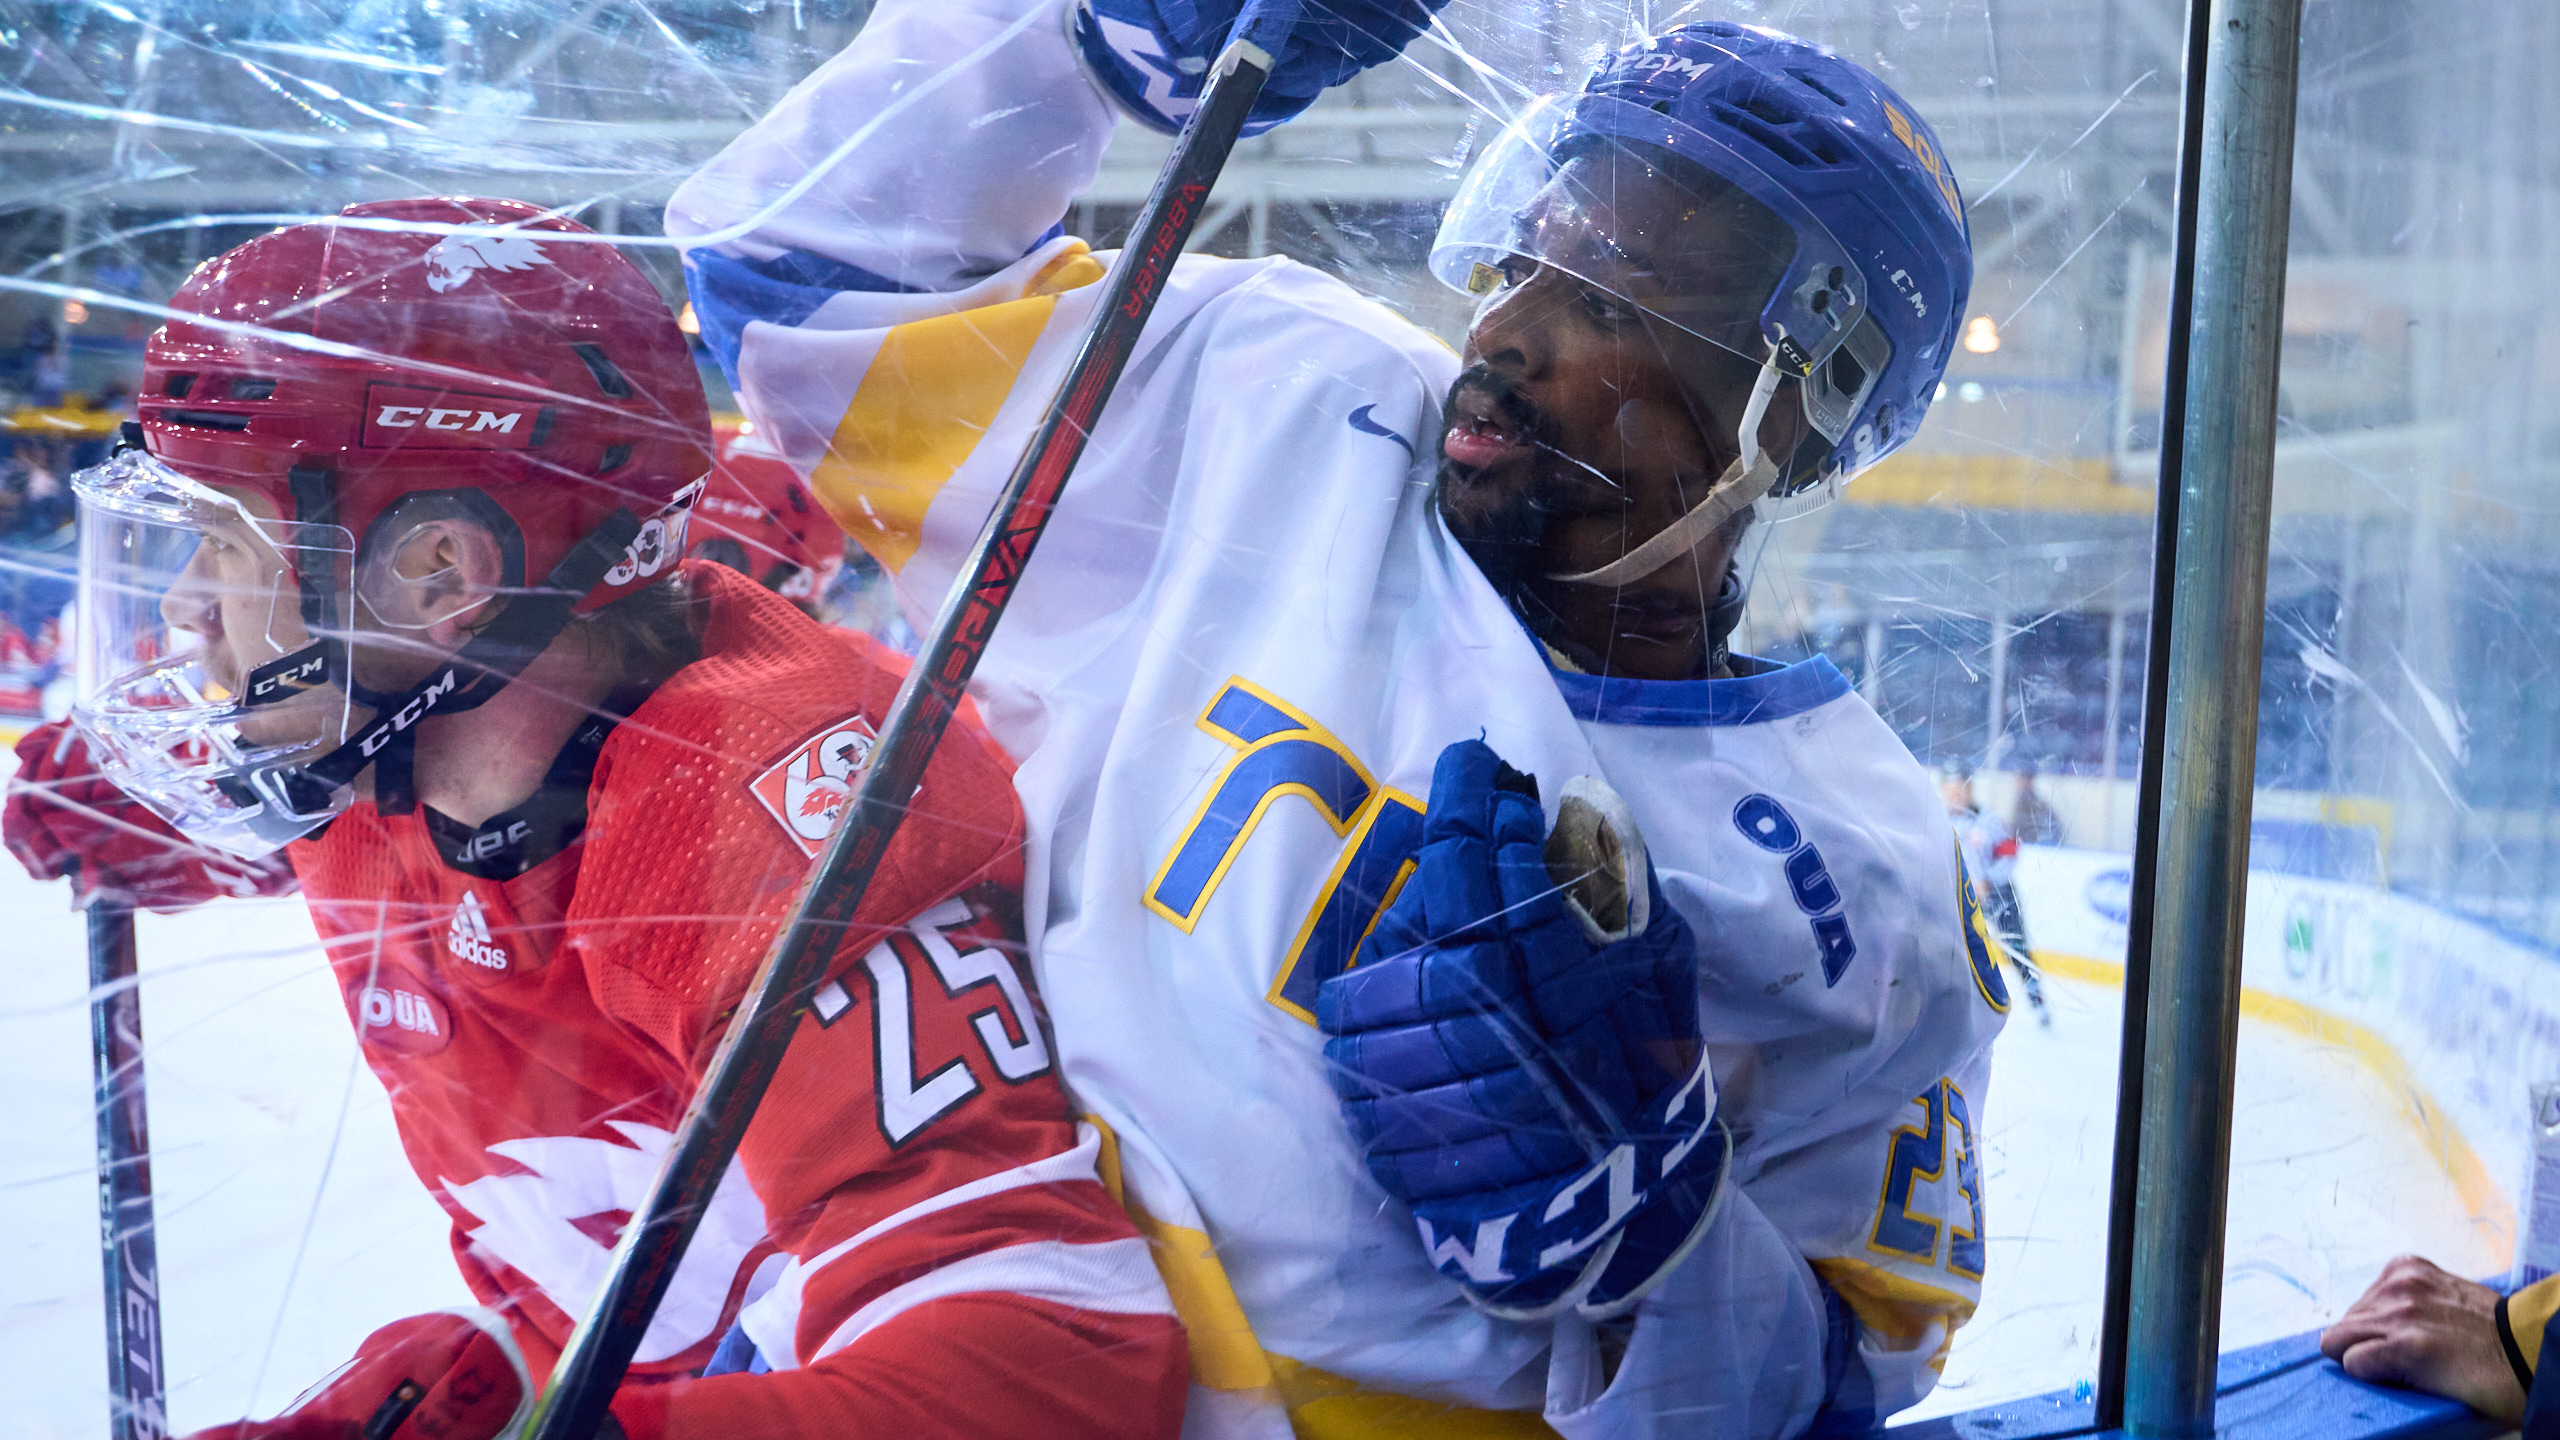 TMU Bold men's hockey player Elijah Roberts is bodied against the boards